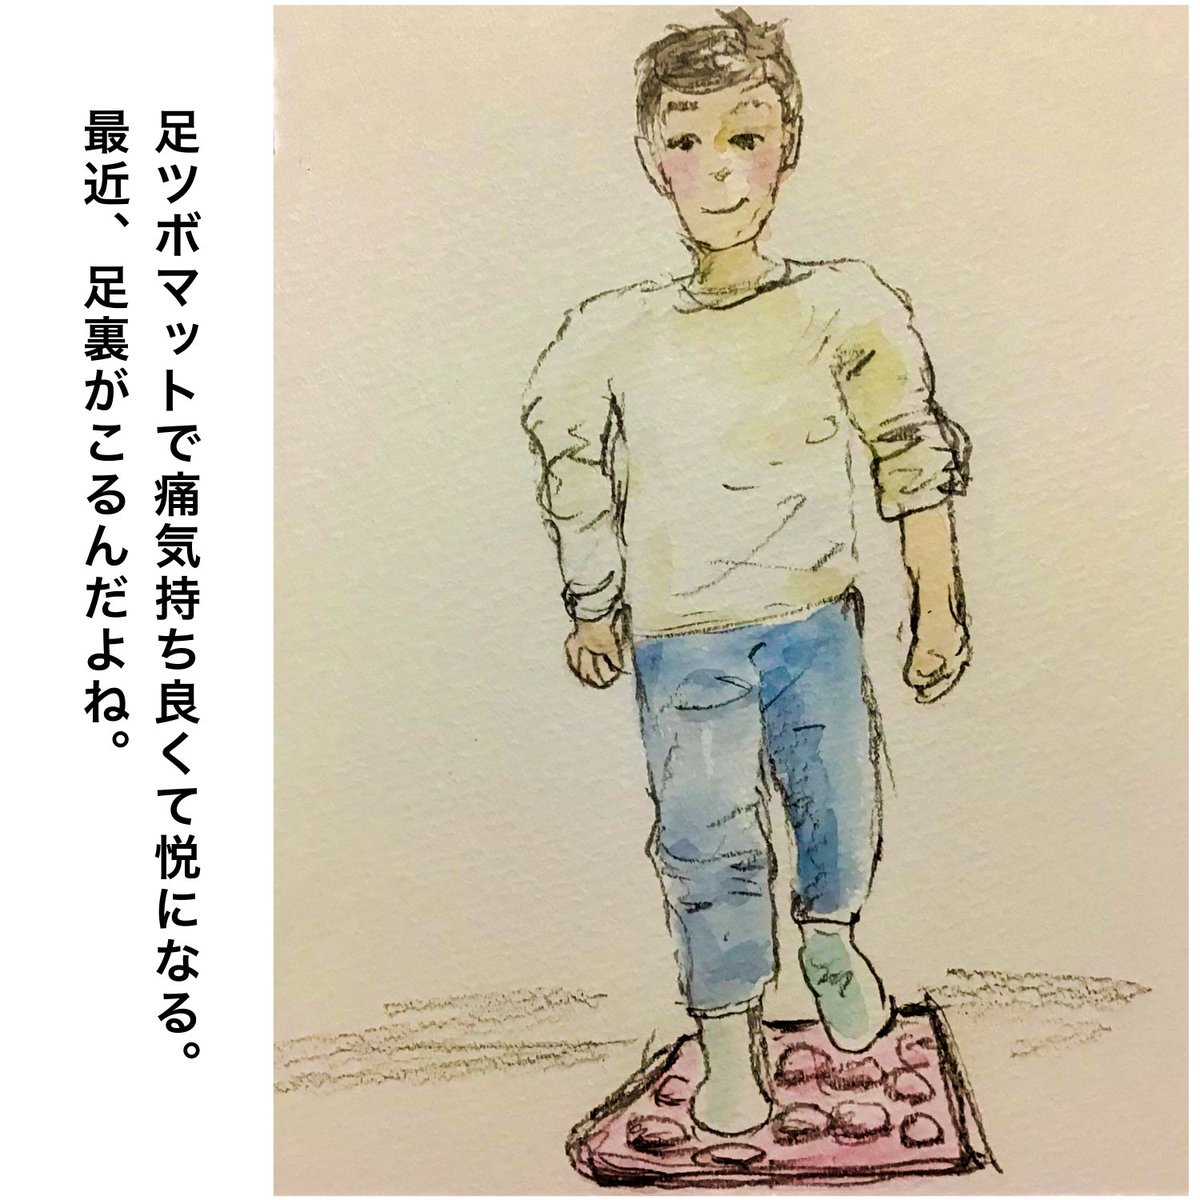 I step on a mat that stimulates the soles of my feet.
It feels good to feel the pain.

#Picturediary 
#絵日記